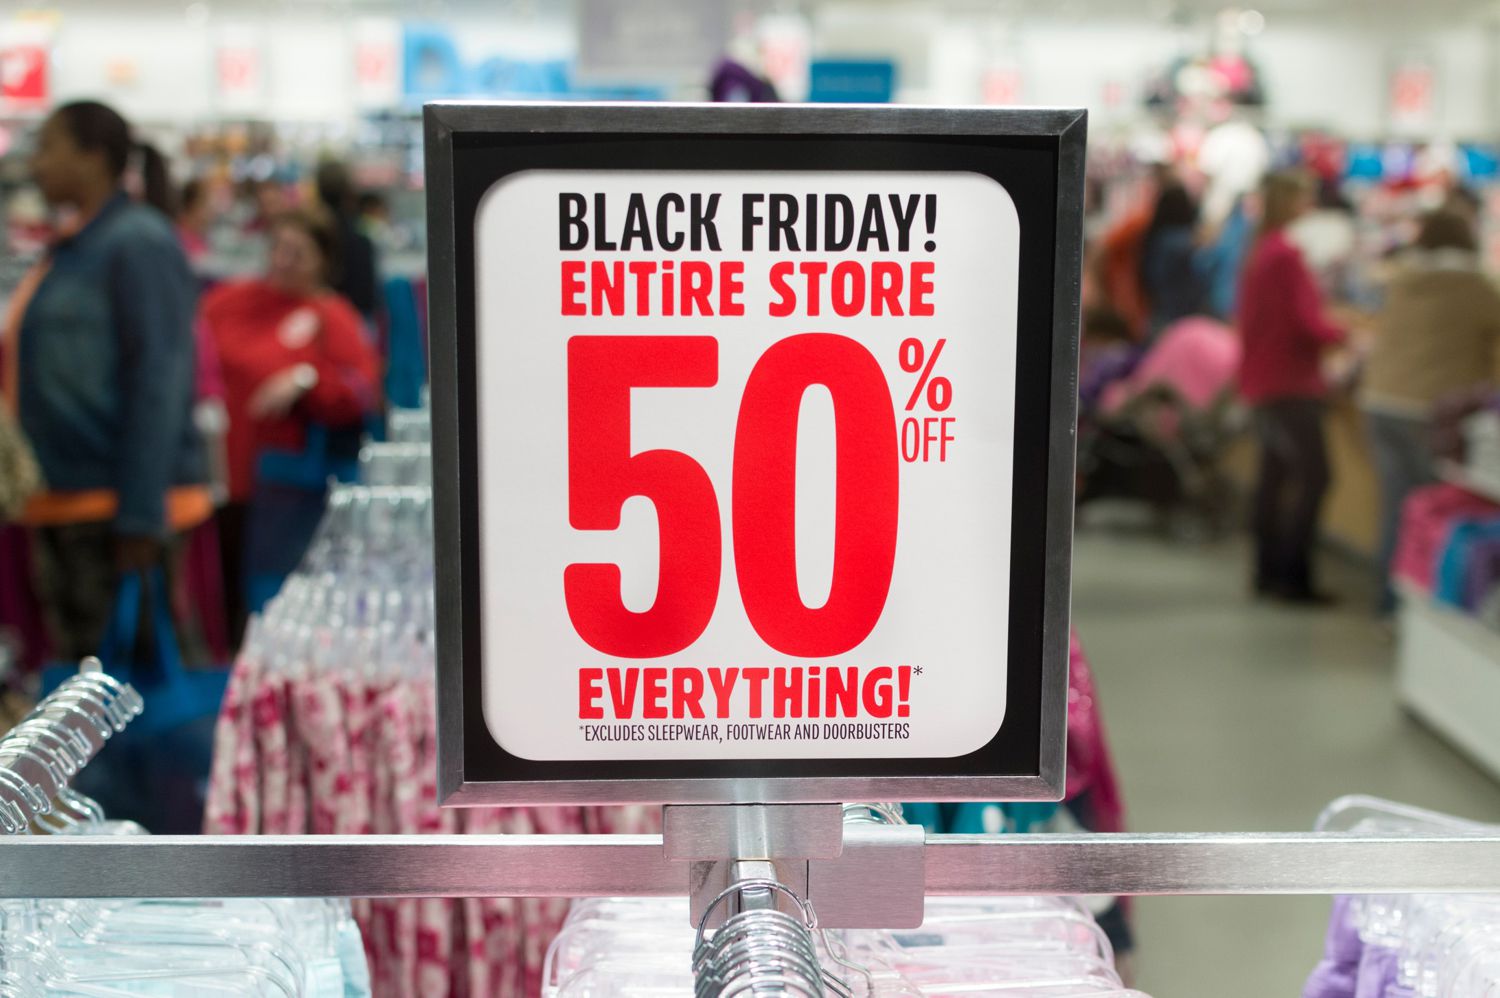 10 Tips to Get the Most Out of Black Friday Deals - Will There Be Any Deals On Black Friday